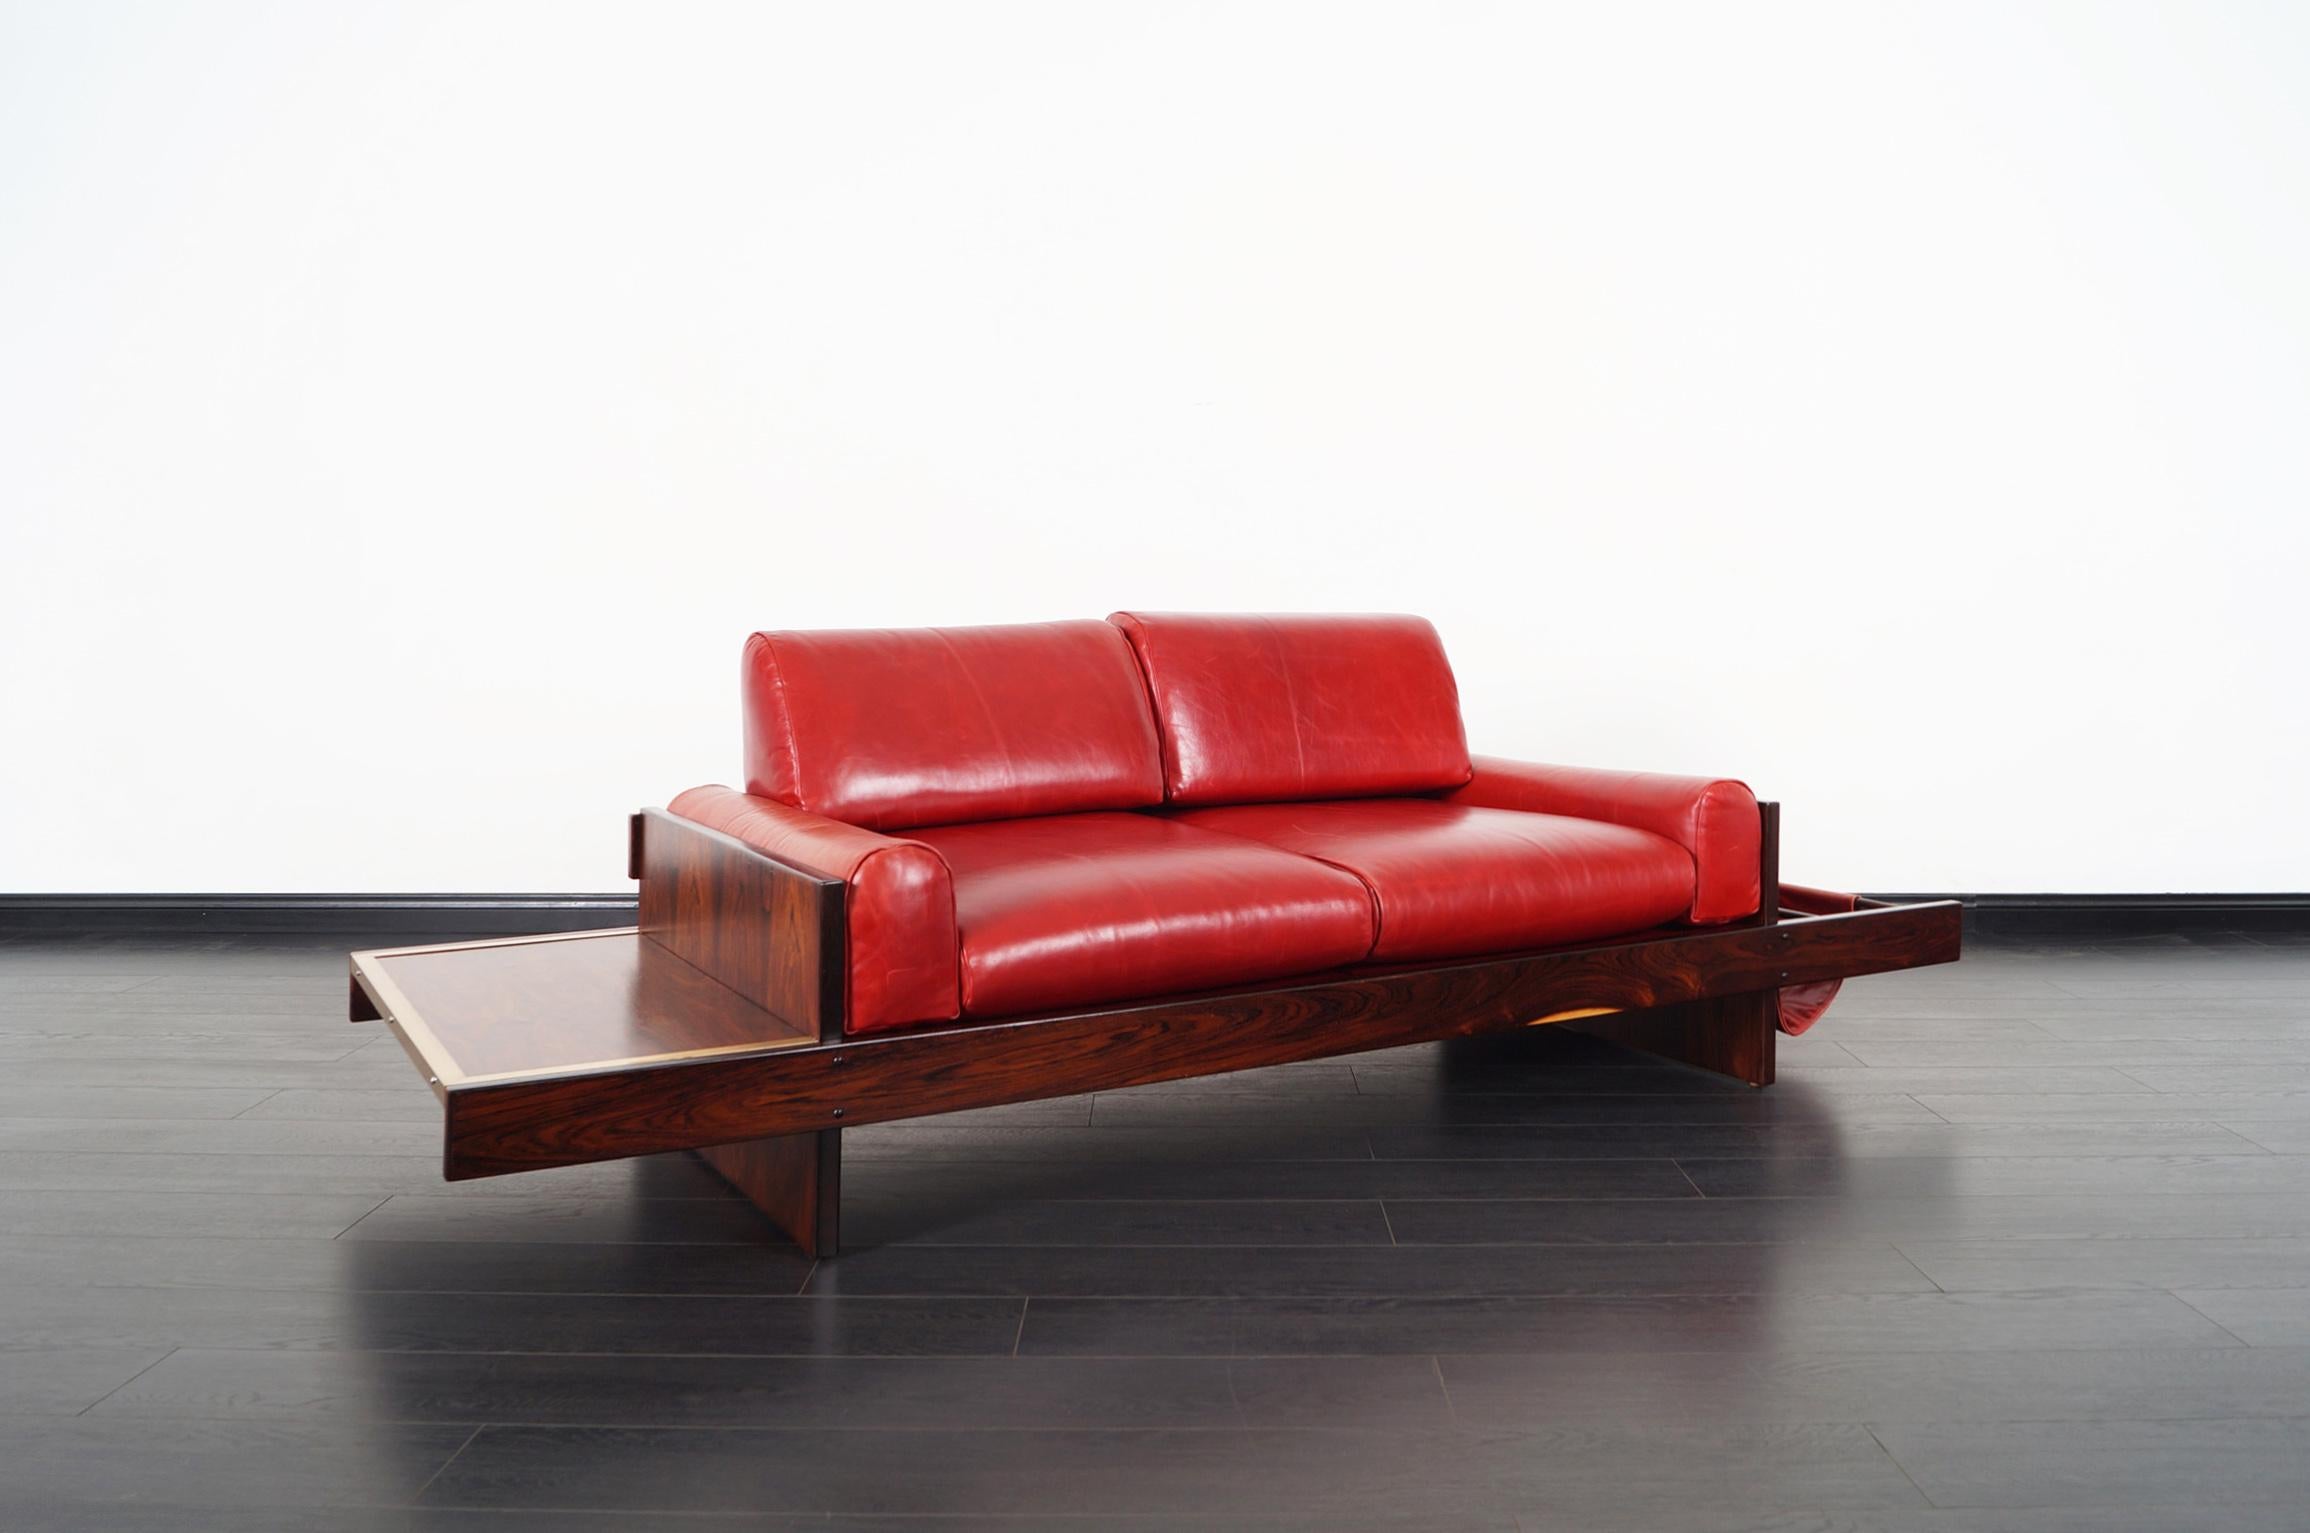 An incredibly unique vintage Brazilian rosewood and leather sofa attributed to Celina Moveis from Brazil, circa 1960s. The design in the structure of the sofa is fascinating, standing out in the center is four leather cushions, which contrast